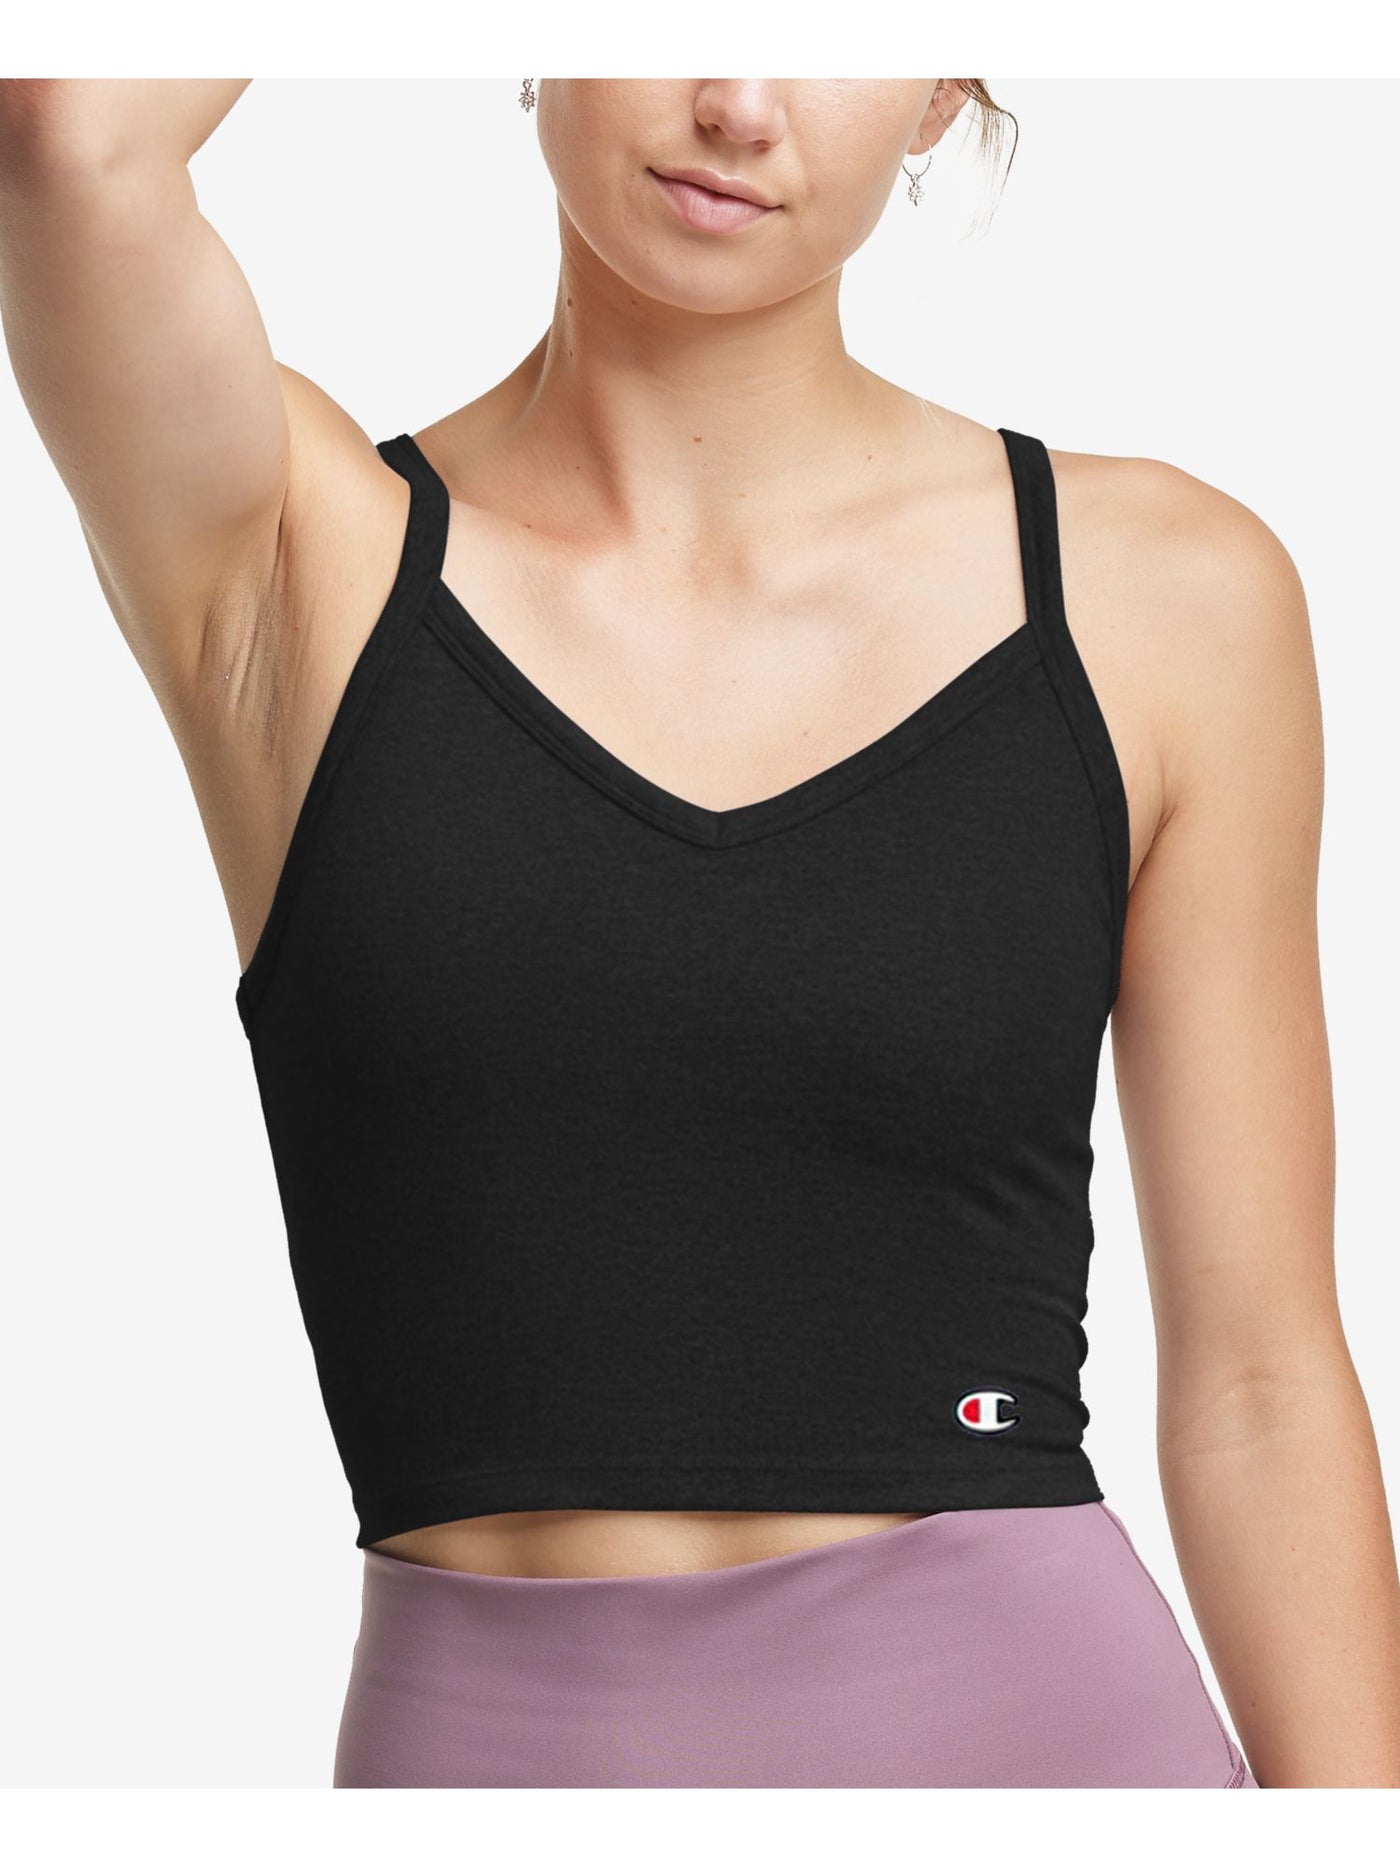 CHAMPION Womens Black Stretch Moisture Wicking Cut Out Cropped Sleeveless V Neck Tank Top XS